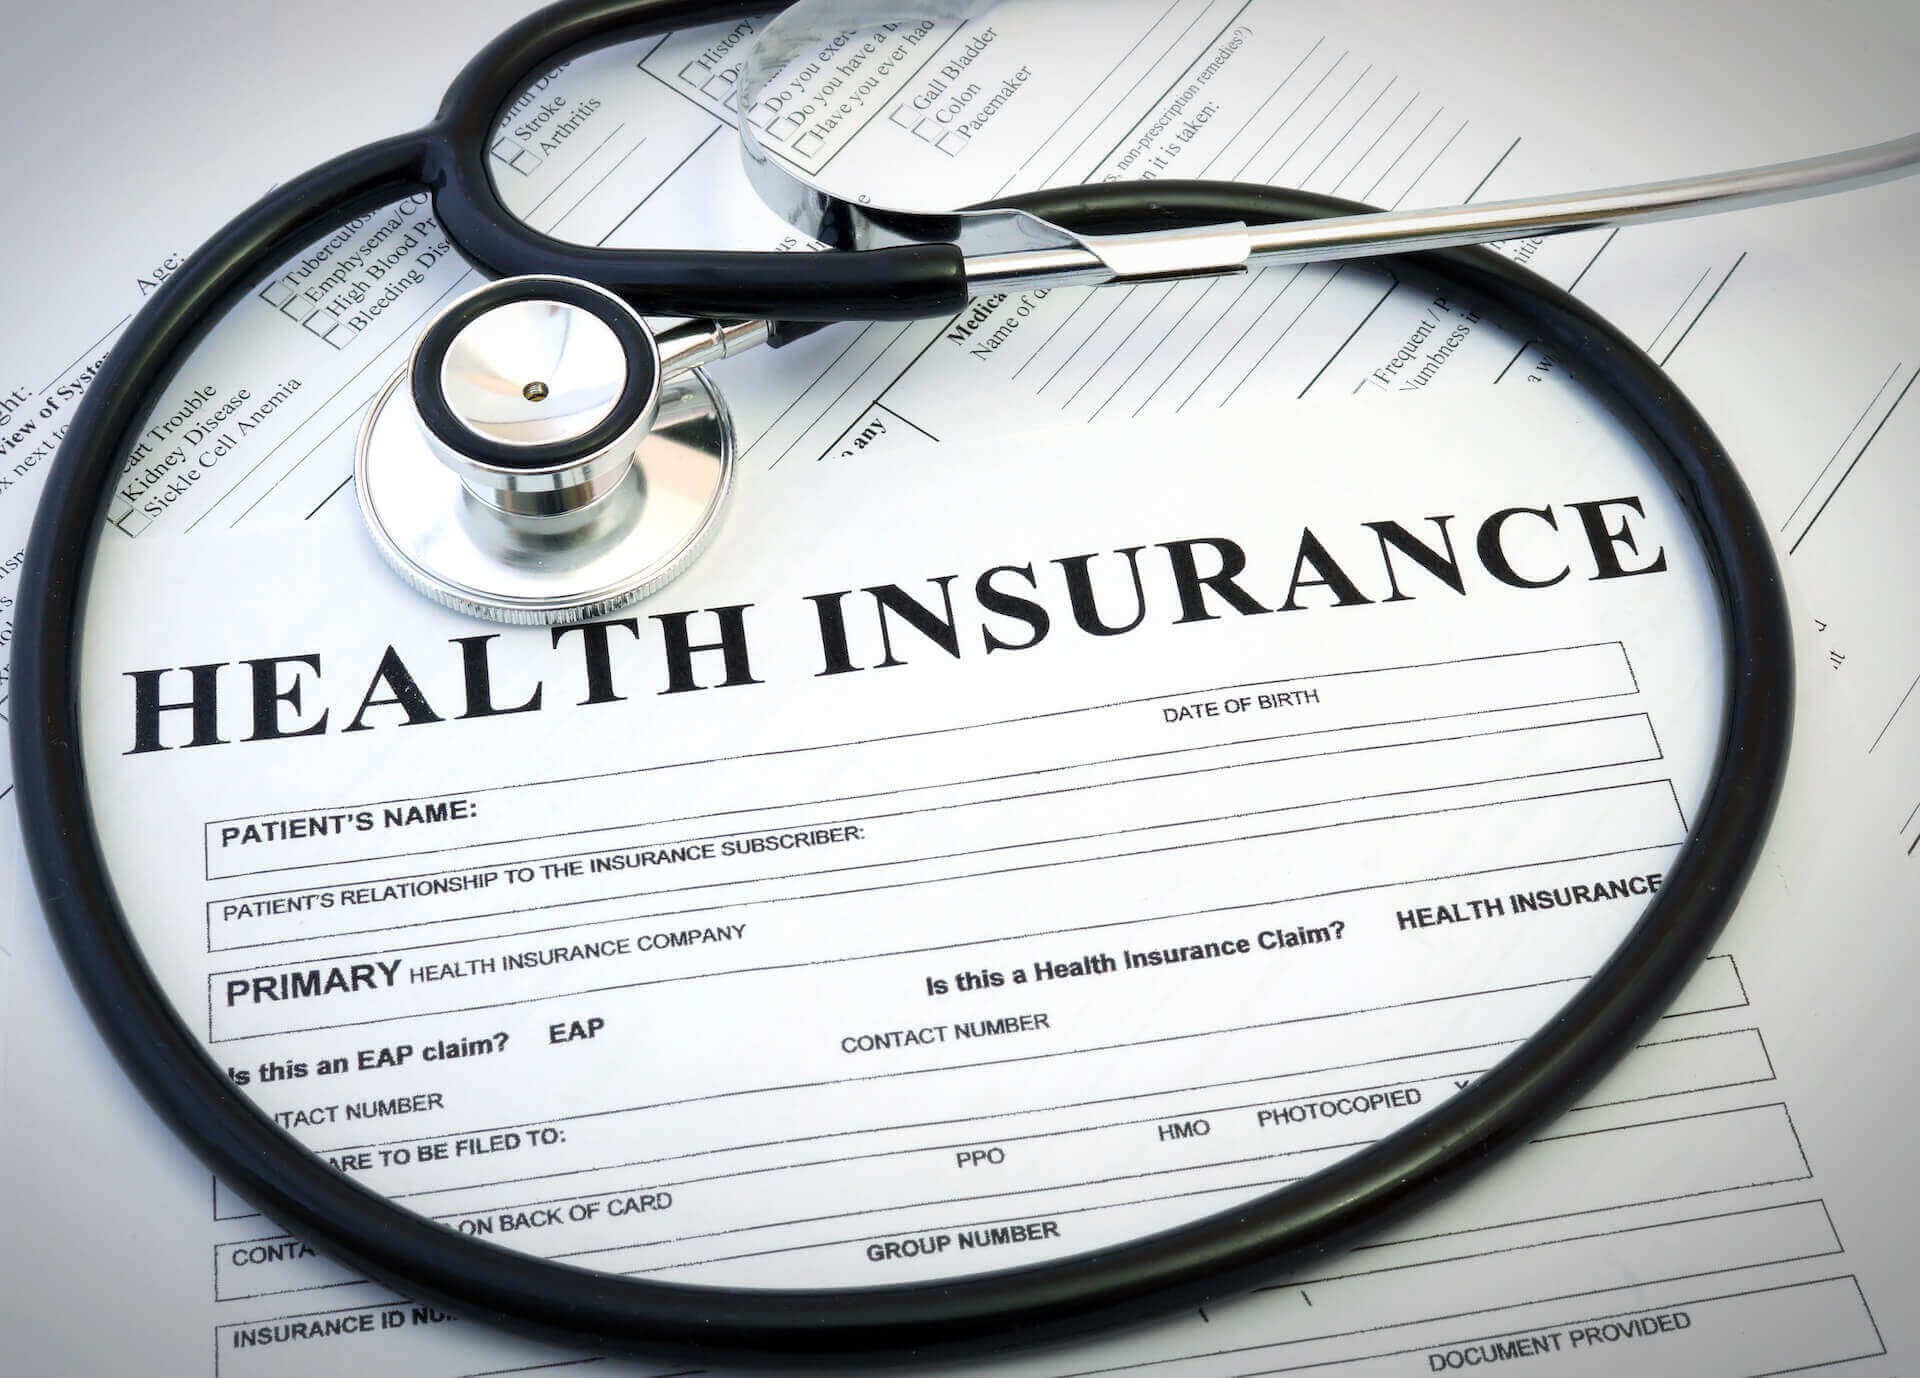 Health insurance for traveling